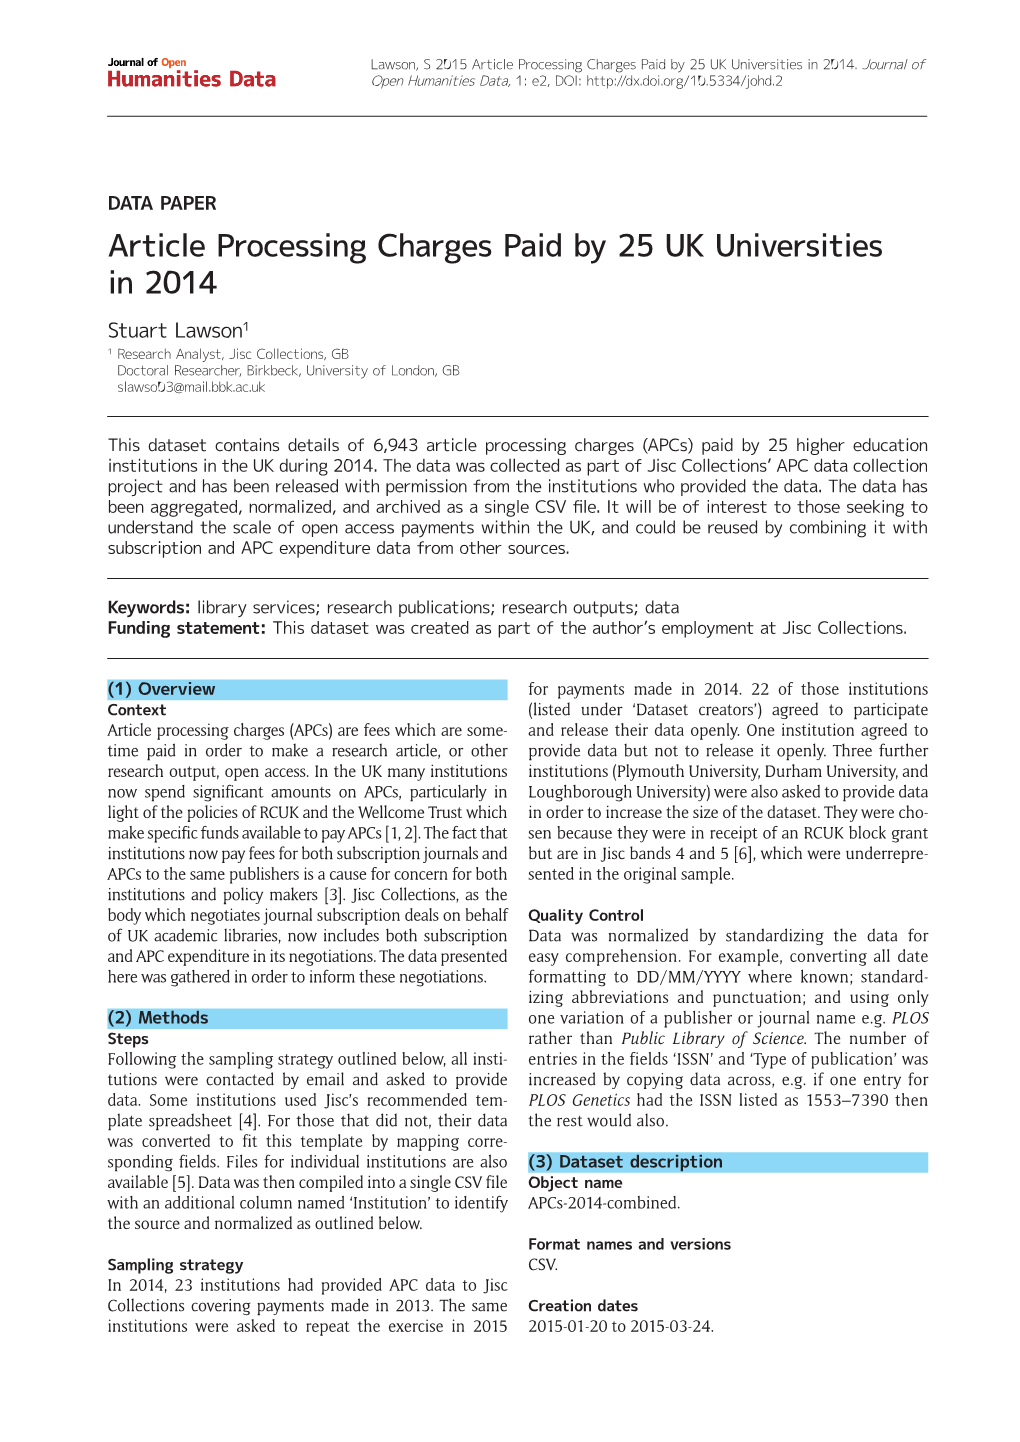 Article Processing Charges Paid by 25 UK Universities in 2014